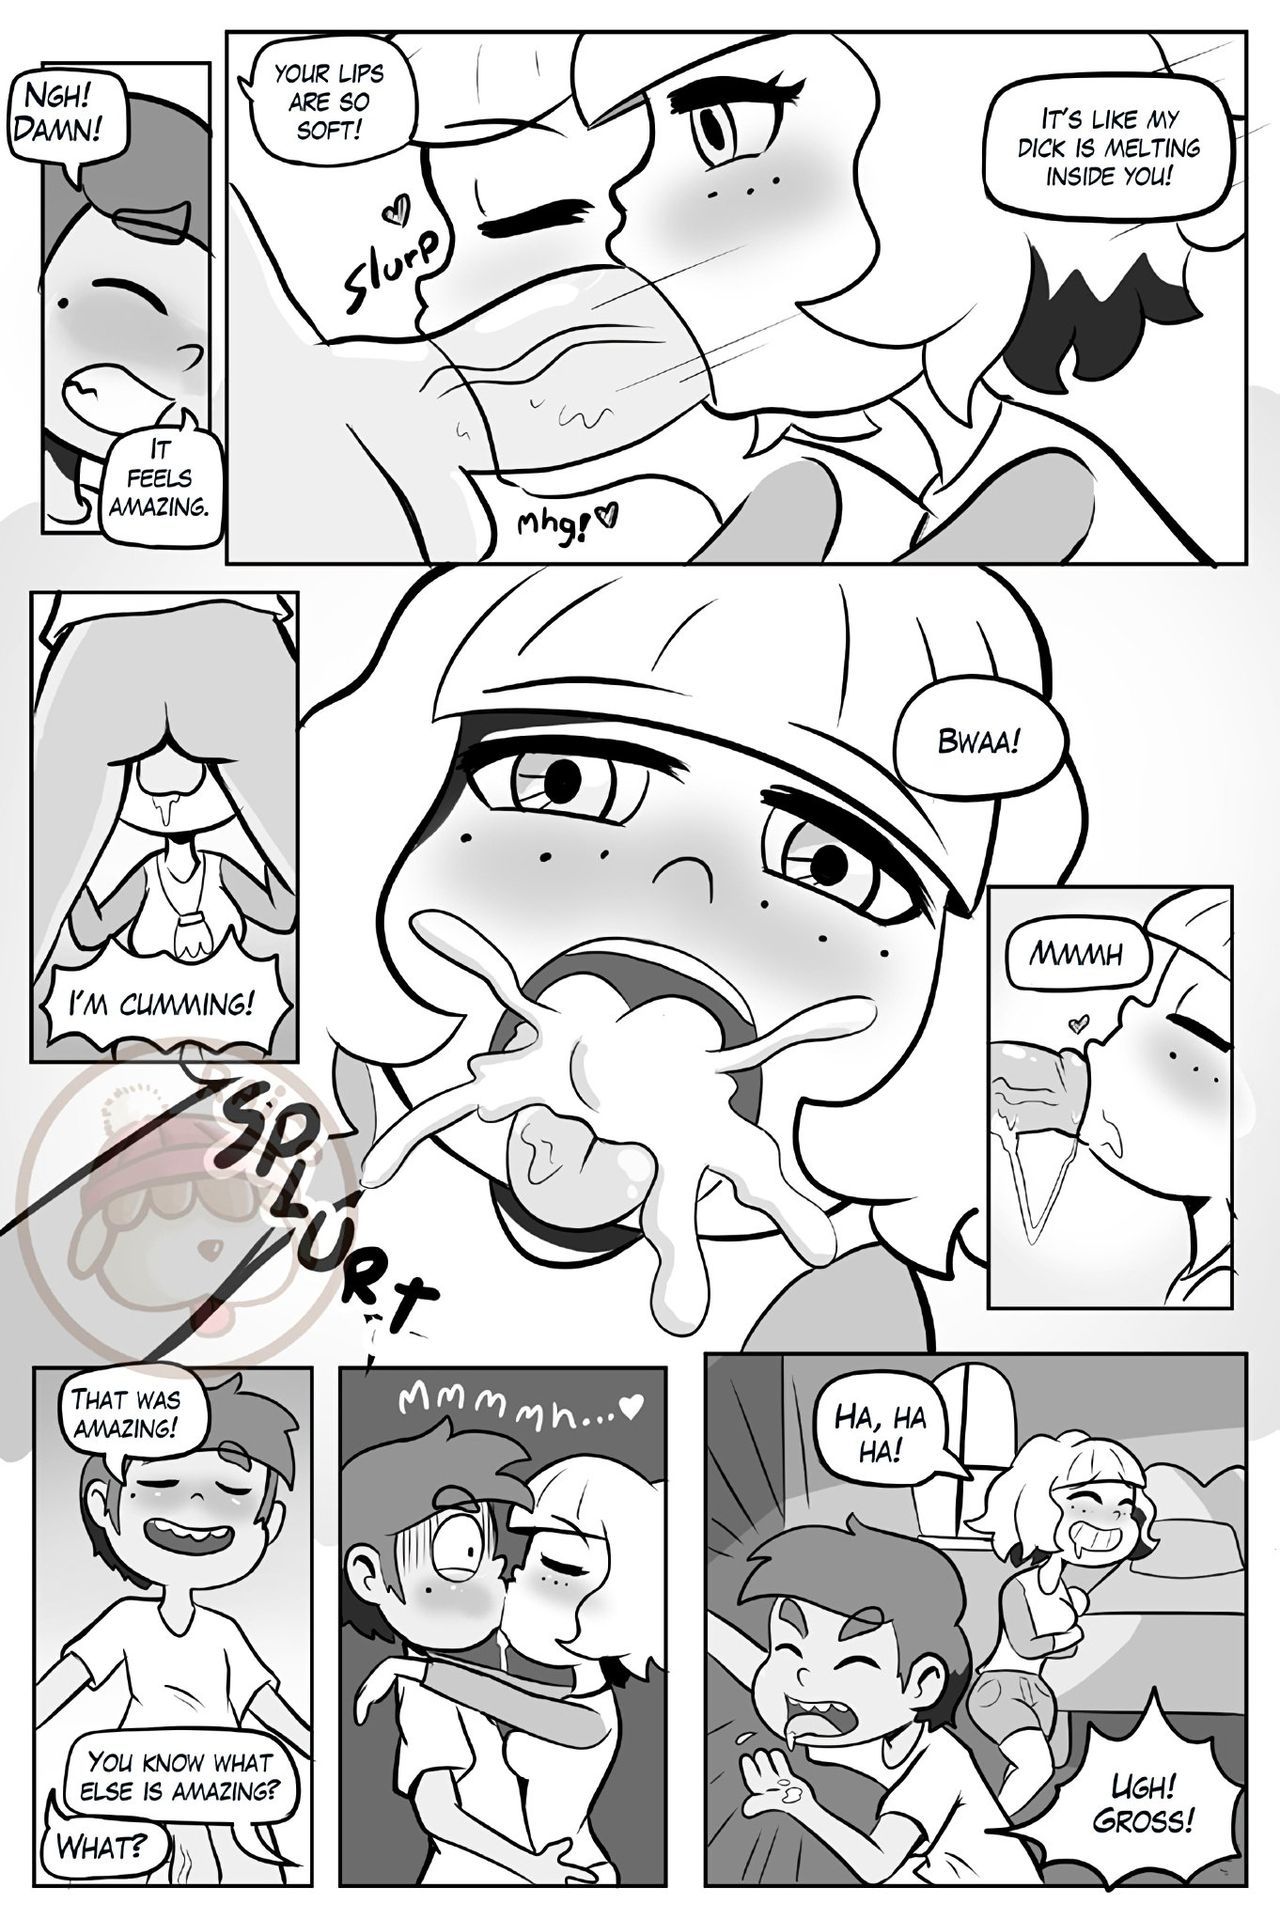 [RaicoSama] END OF YEAR PARTY (Star VS The Forces of Evil) [English] [UNCENSORED] 4